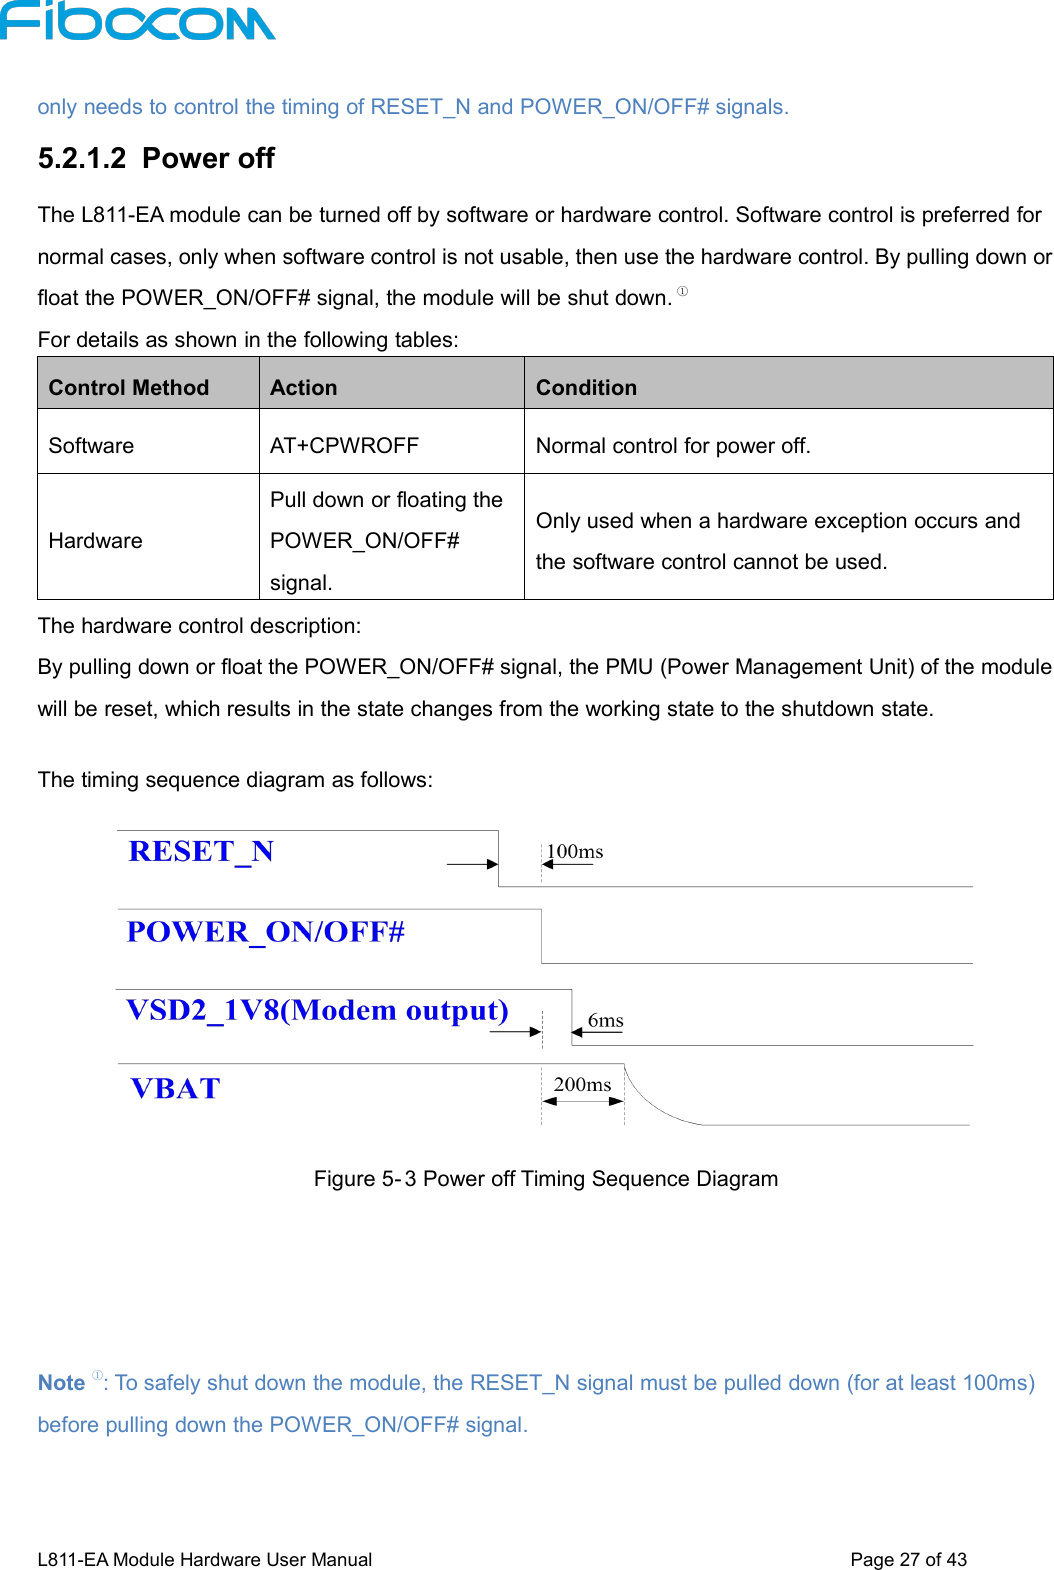 L811-EA Module Hardware User Manual Page27of43only needs to control the timing of RESET_N and POWER_ON/OFF# signals.5.2.1.2 Power offThe L811-EA module can be turned off by software or hardware control. Software control is preferred fornormal cases, only when software control is not usable, then use the hardware control. By pulling down orfloat the POWER_ON/OFF# signal, the module will be shut down. ①For details as shown in the following tables:Control MethodActionConditionSoftwareAT+CPWROFFNormal control for power off.HardwarePull down or floating thePOWER_ON/OFF#signal.Only used when a hardware exception occurs andthe software control cannot be used.The hardware control description:By pulling down or float the POWER_ON/OFF# signal, the PMU (Power Management Unit) of the modulewill be reset, which results in the state changes from the working state to the shutdown state.The timing sequence diagram as follows:Figure 5- 3 Power off Timing Sequence DiagramNote ①: To safely shut down the module, the RESET_N signal must be pulled down (for at least 100ms)before pulling down the POWER_ON/OFF# signal.